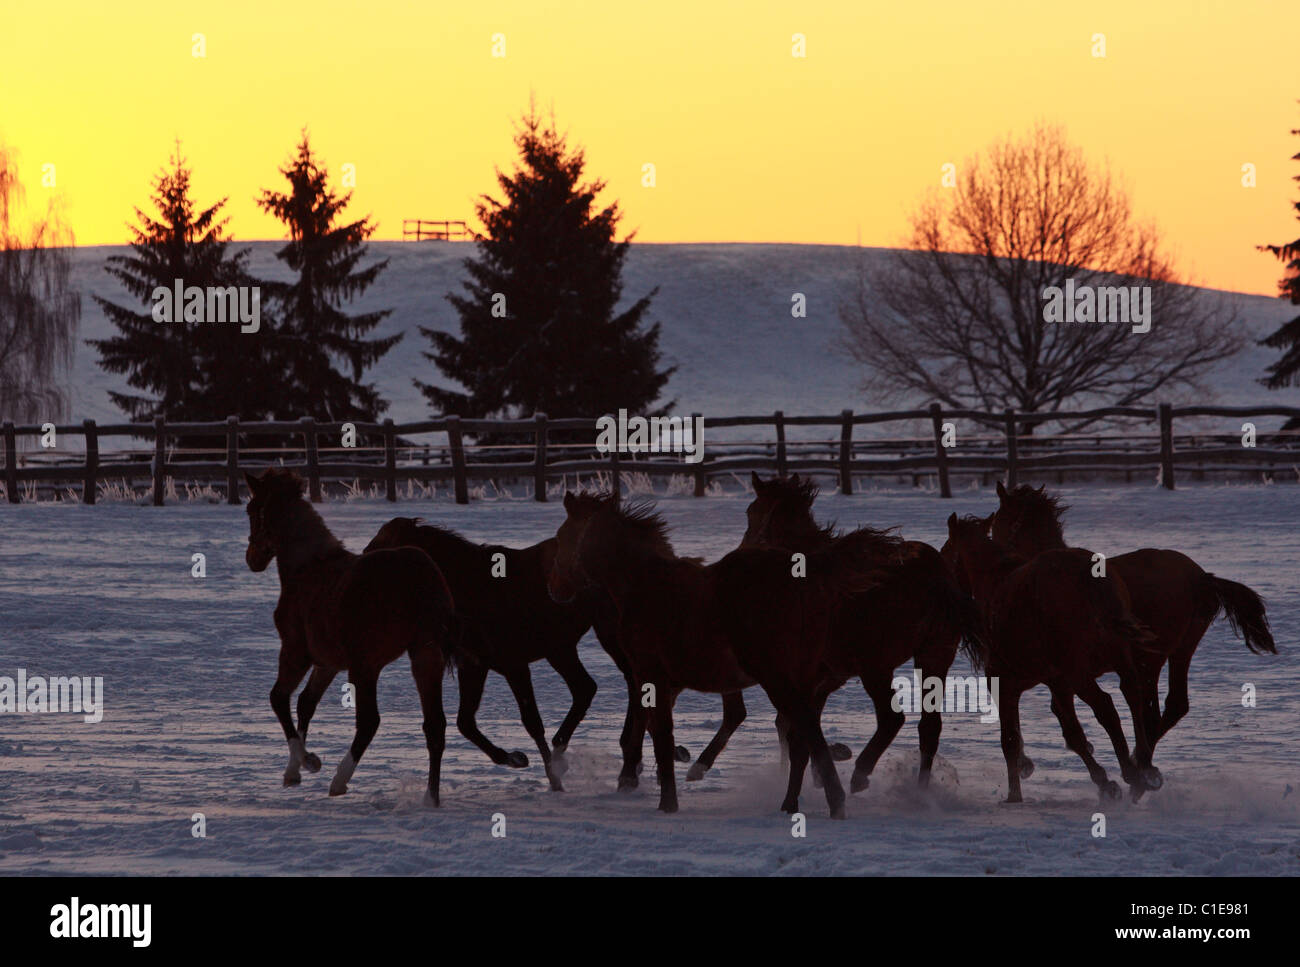 Silhouettes of horses in a paddock at dawn, Goerlsdorf, Germany Stock Photo